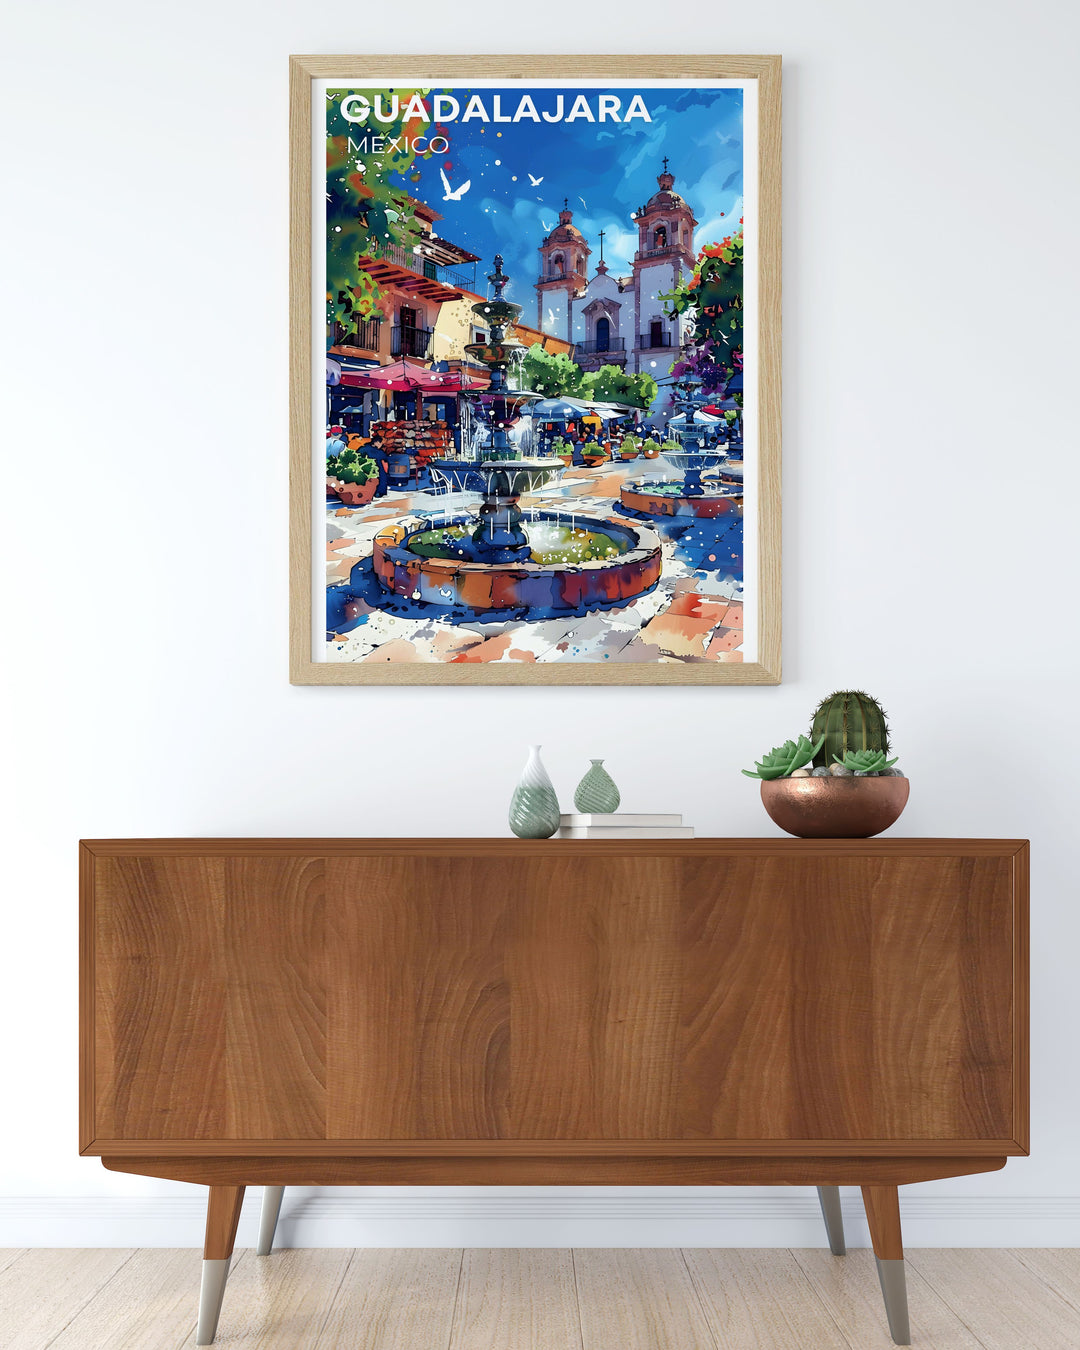 Showcasing the cultural richness of Plaza Tapatía, this art print highlights the stunning fountains, sculptures, and historic landmarks that make this plaza the heart of Guadalajara.